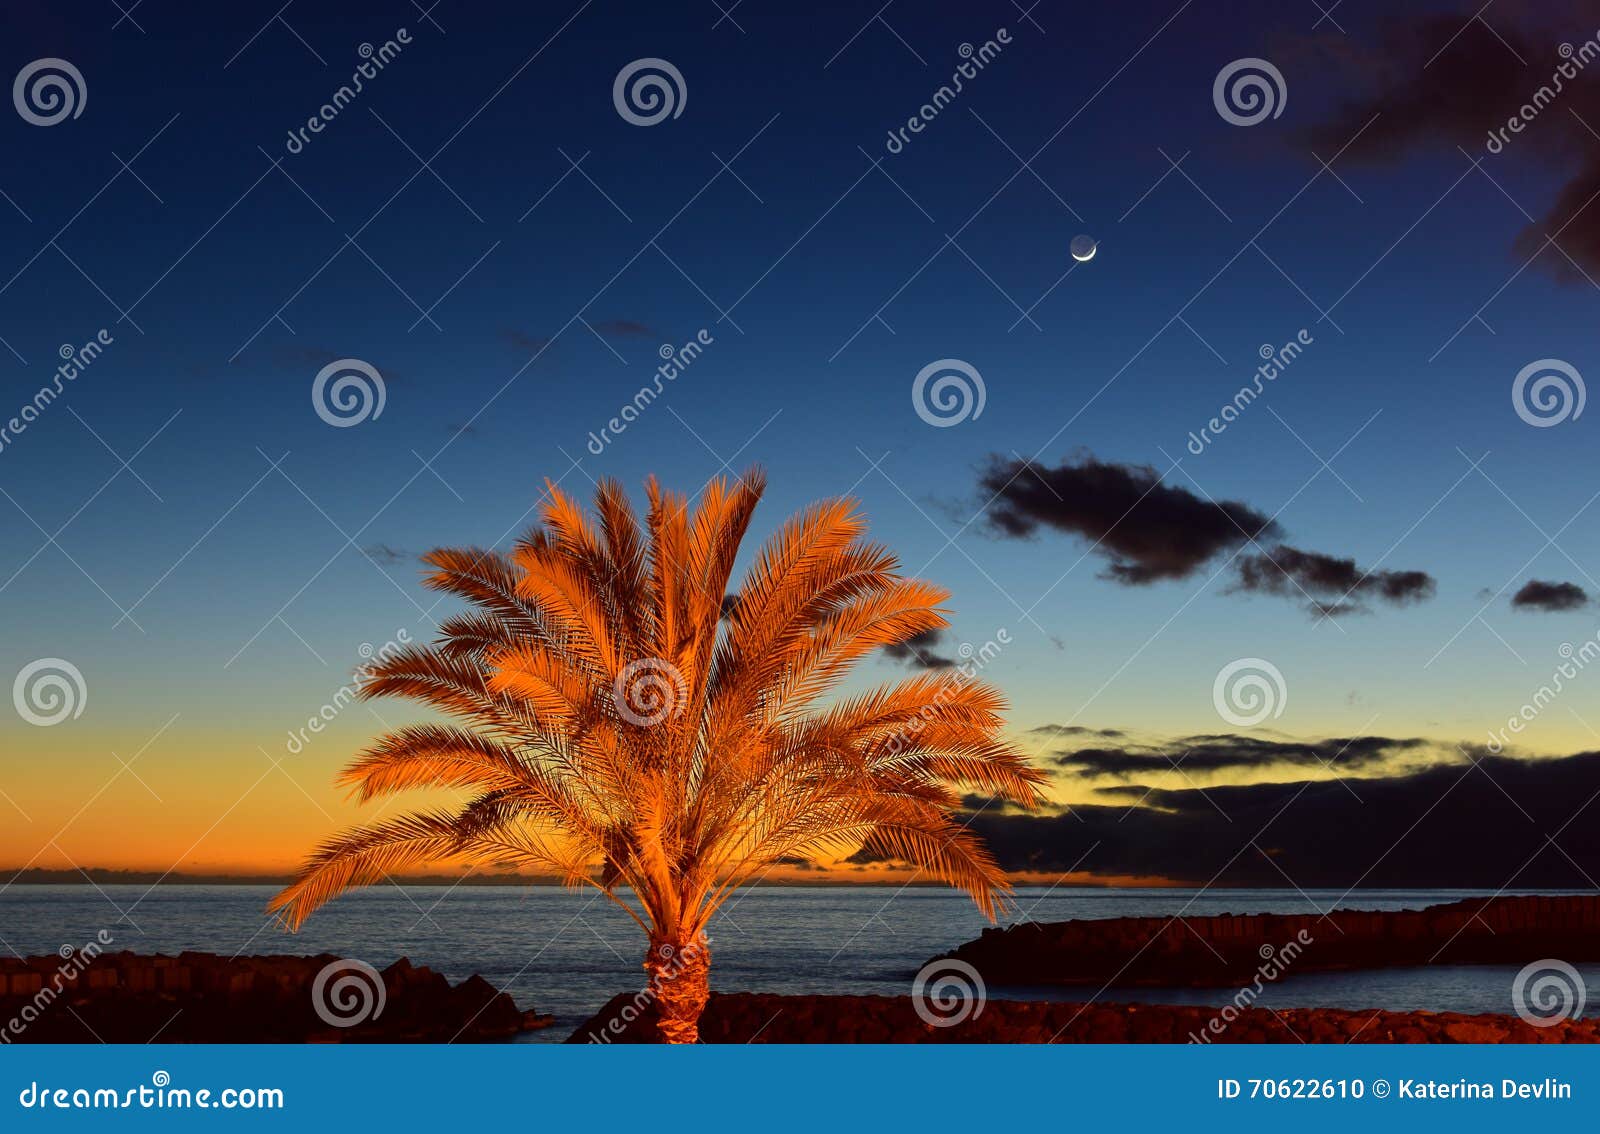 sunset on beach with moonrise in madeira insel,